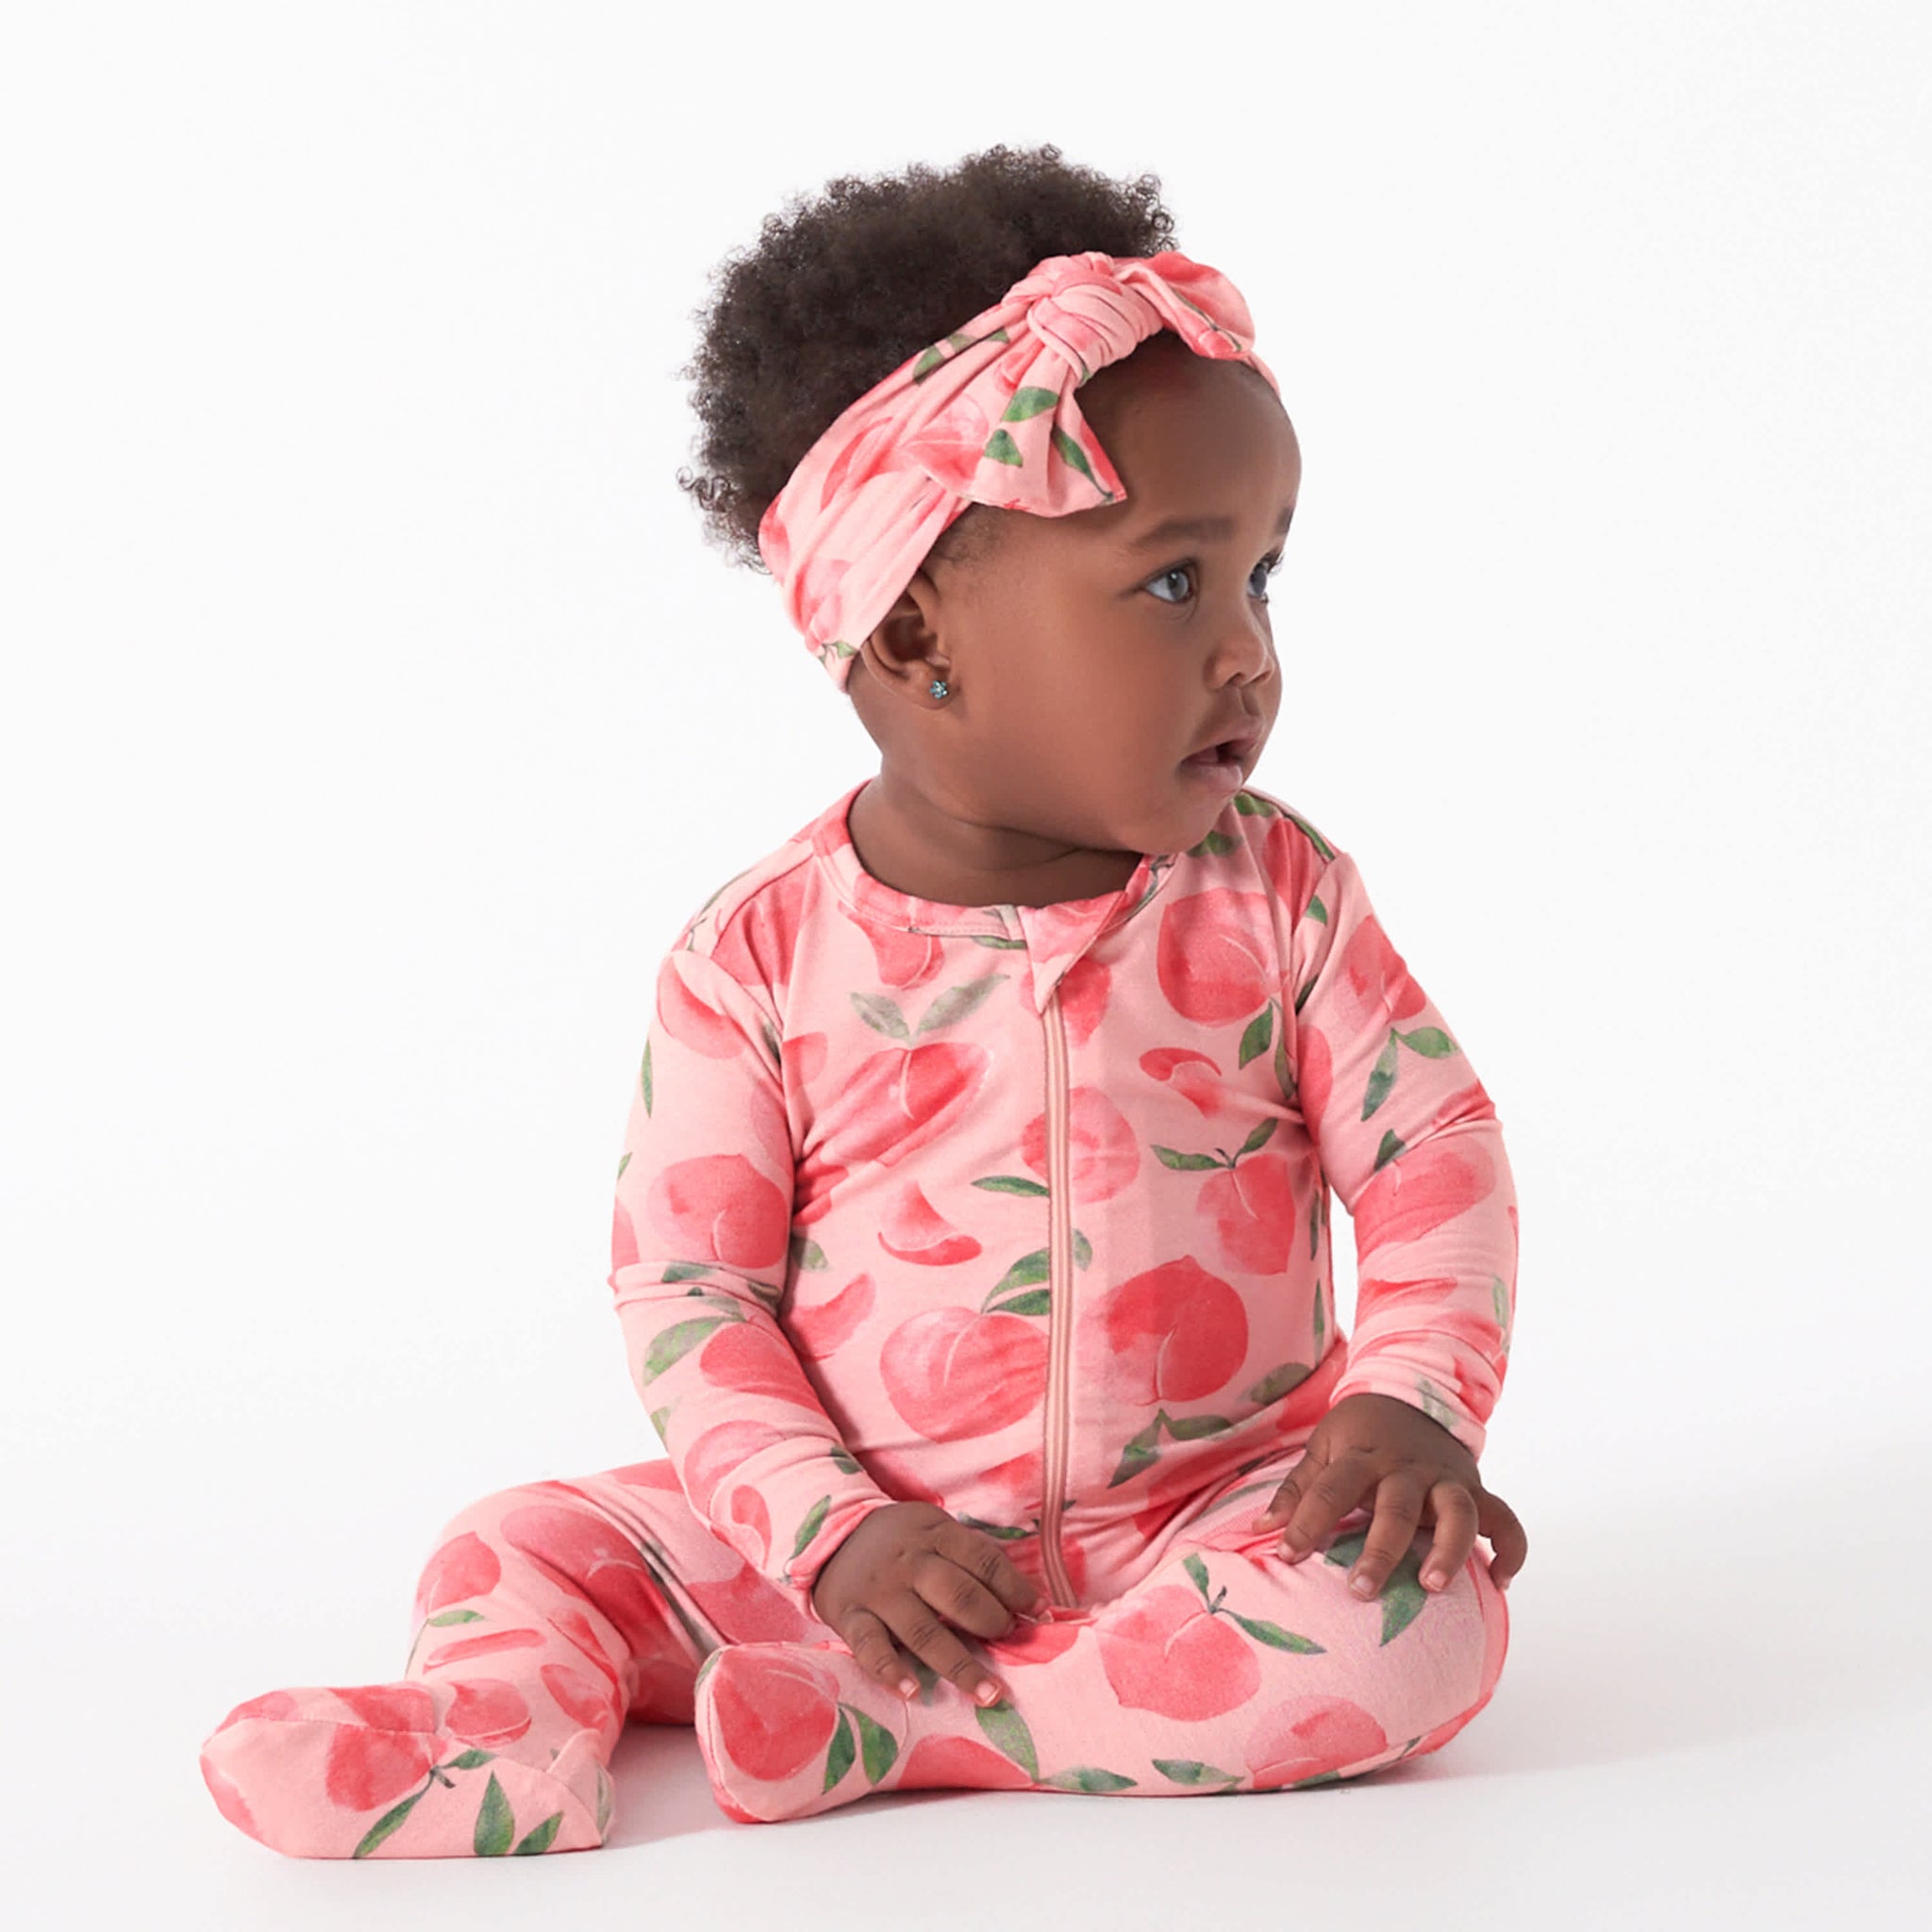 Baby & Toddler Girls Just Peachy Buttery Soft Viscose Made from Eucalyptus Snug Fit Footed Pajamas-Gerber Childrenswear Wholesale